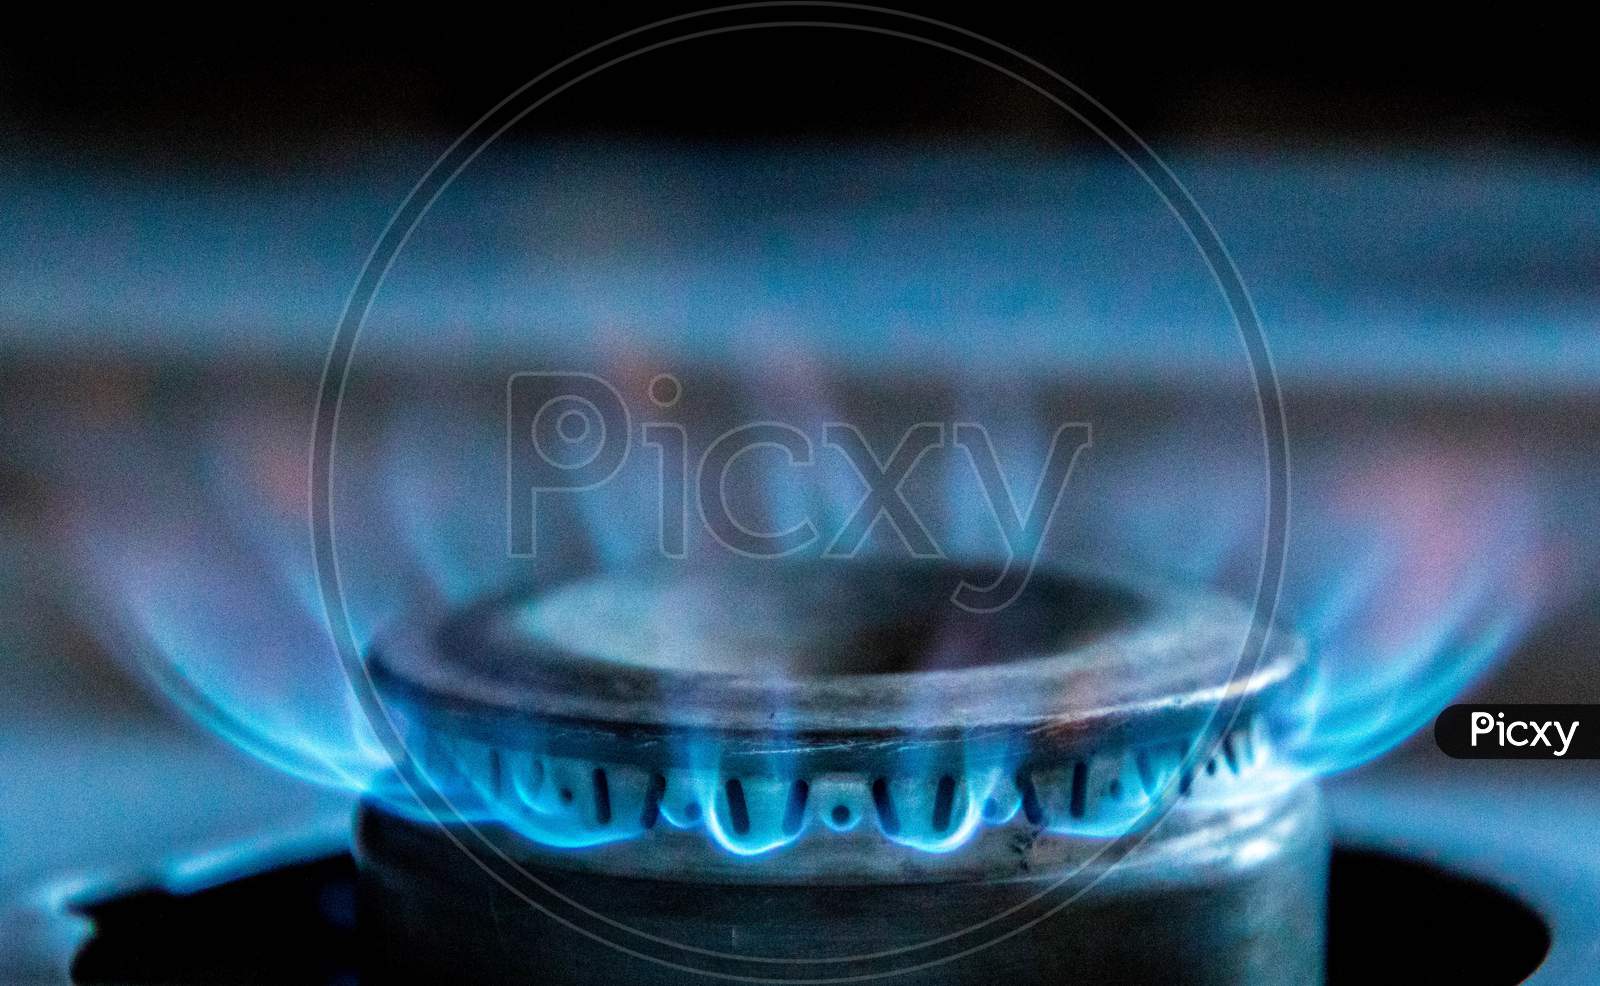 Gas Supply Flame